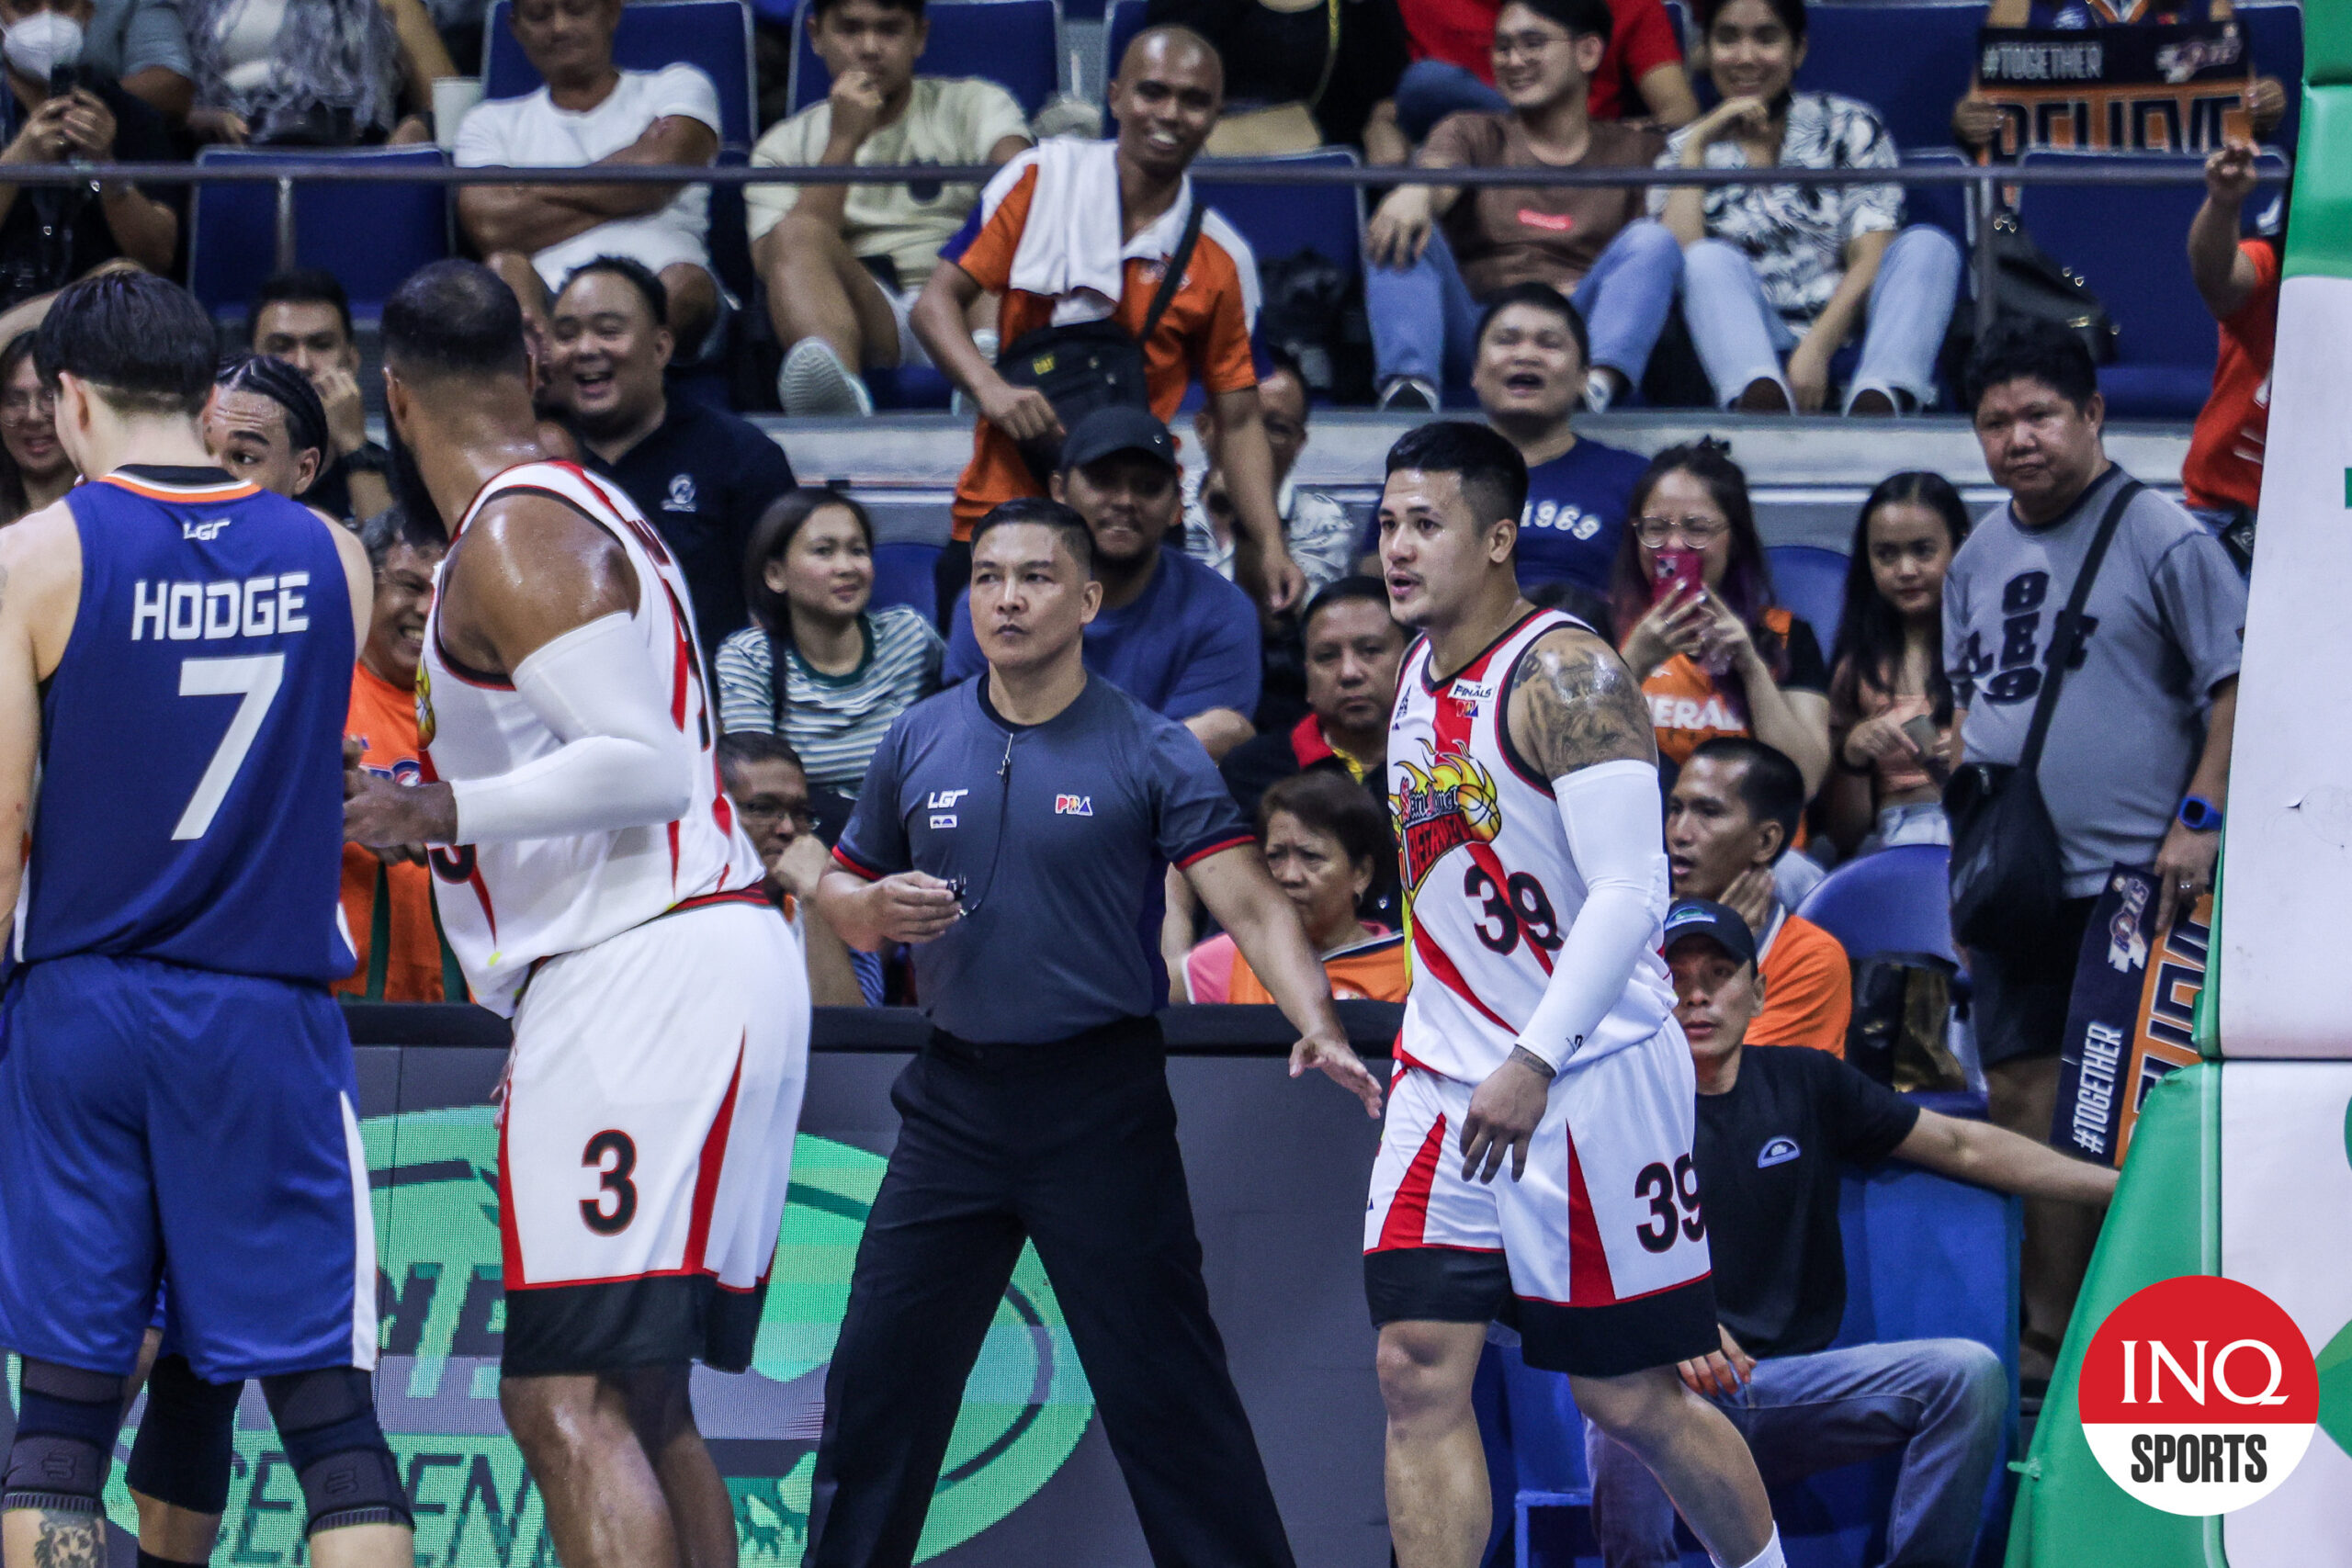 San Miguel Beermen's Jericho Cruz in Game 2 of the PBA Philippine Cup Finals against Meralco Bolts.